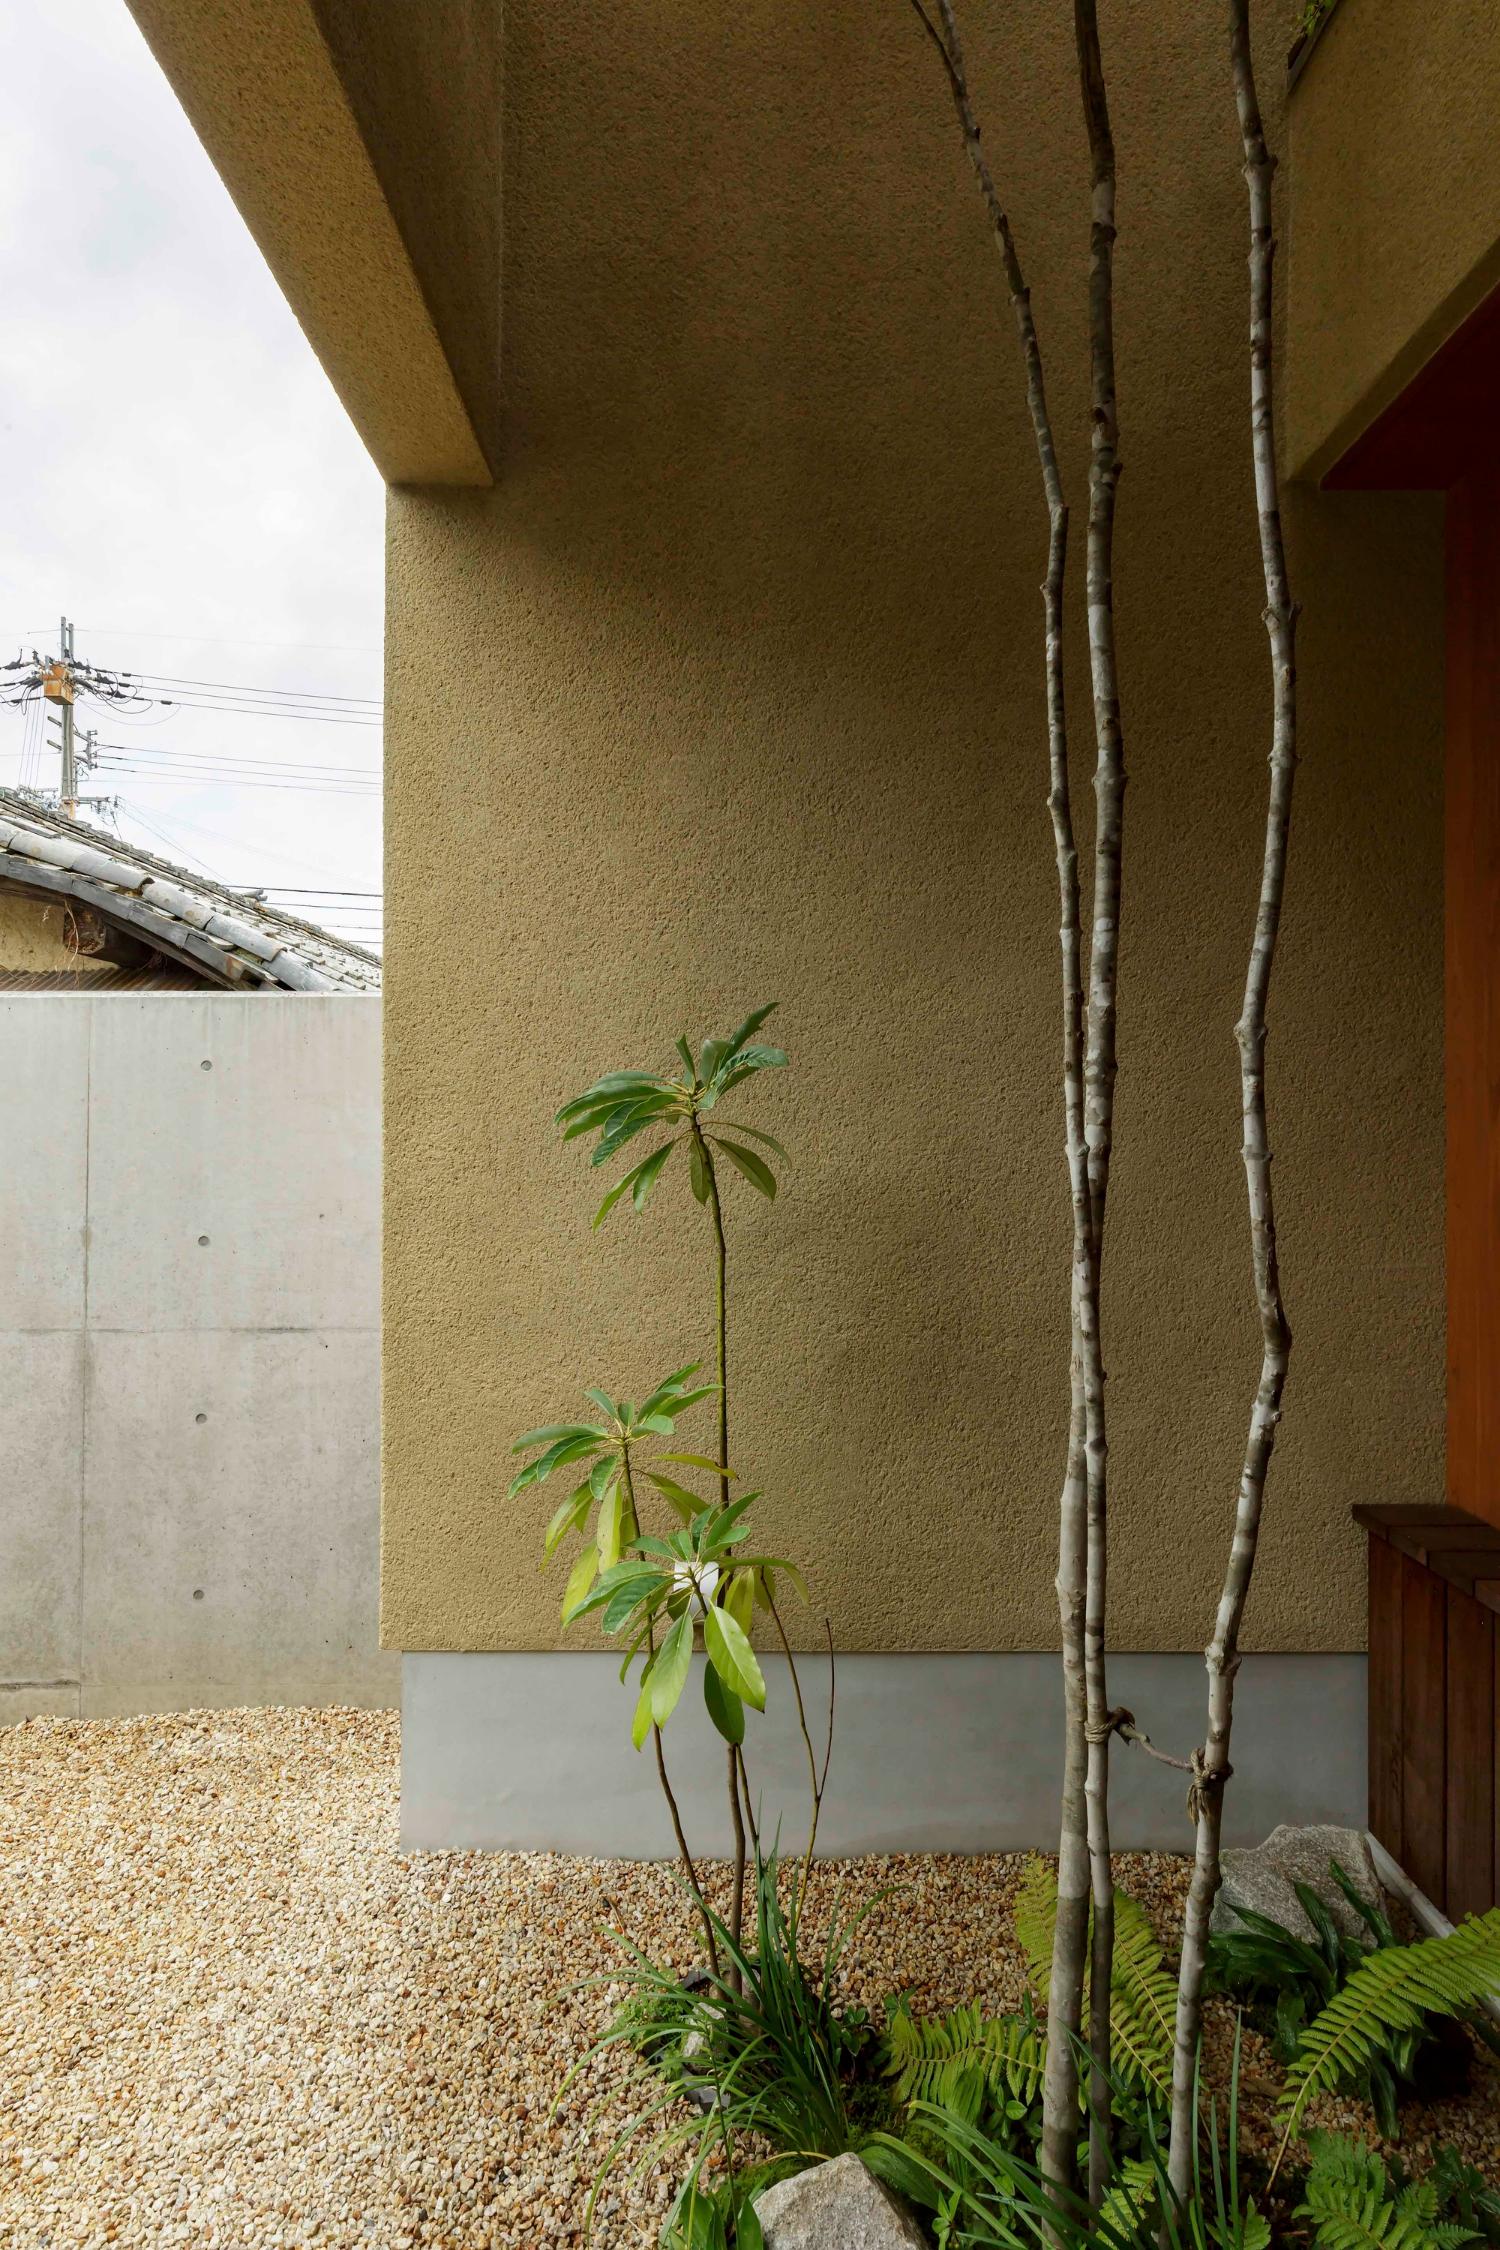 Japanese House with Integrated Planted Trees by Hearth Architects